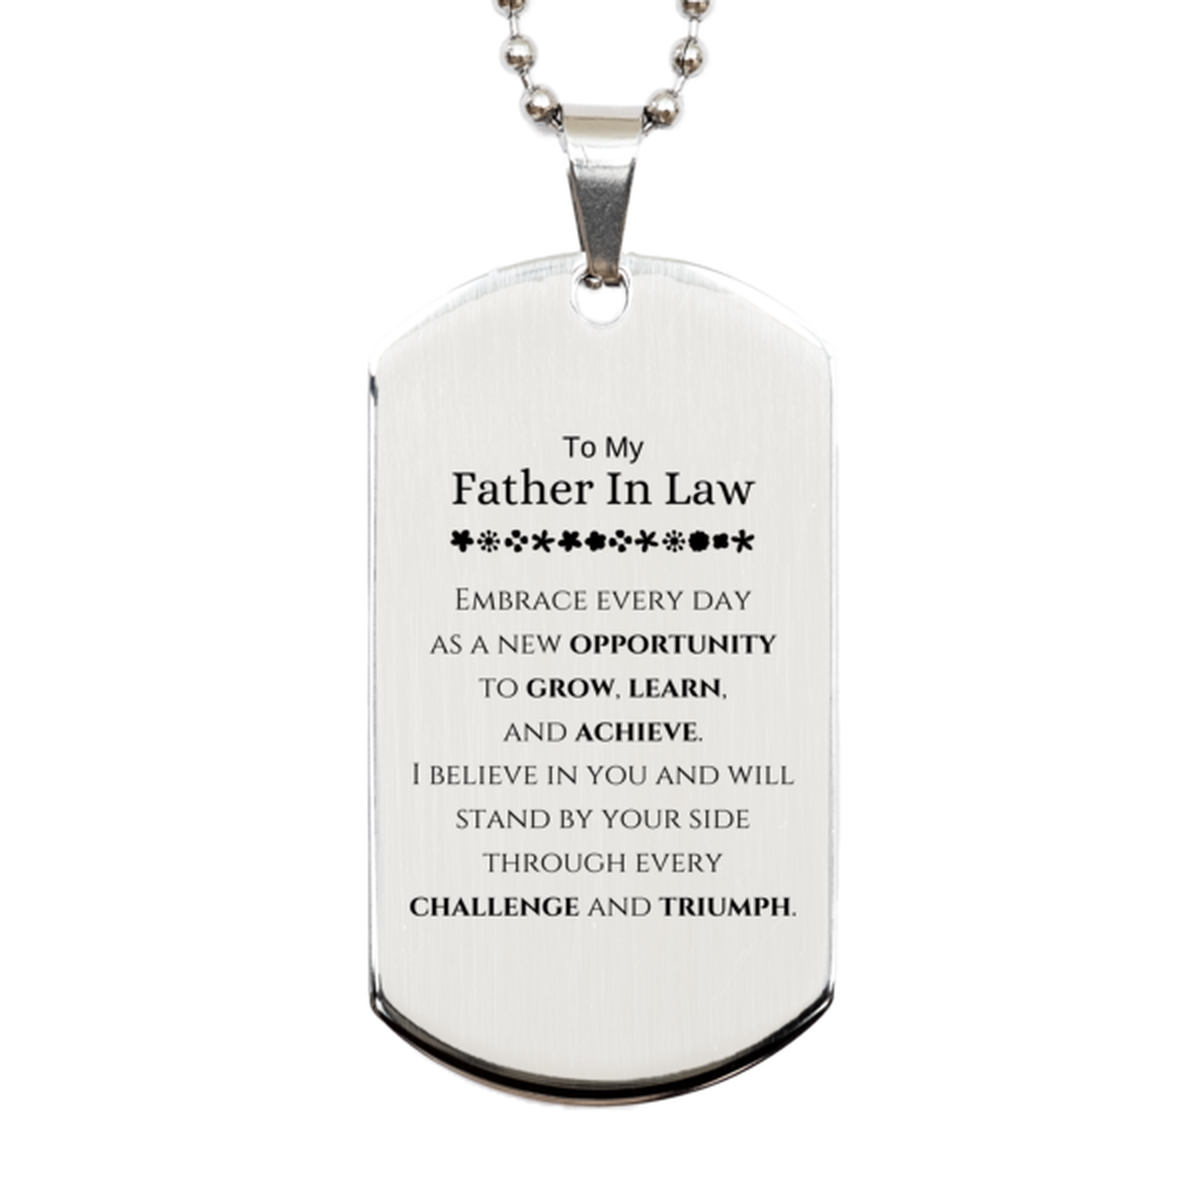 To My Father In Law Gifts, I believe in you and will stand by your side, Inspirational Silver Dog Tag For Father In Law, Birthday Christmas Motivational Father In Law Gifts